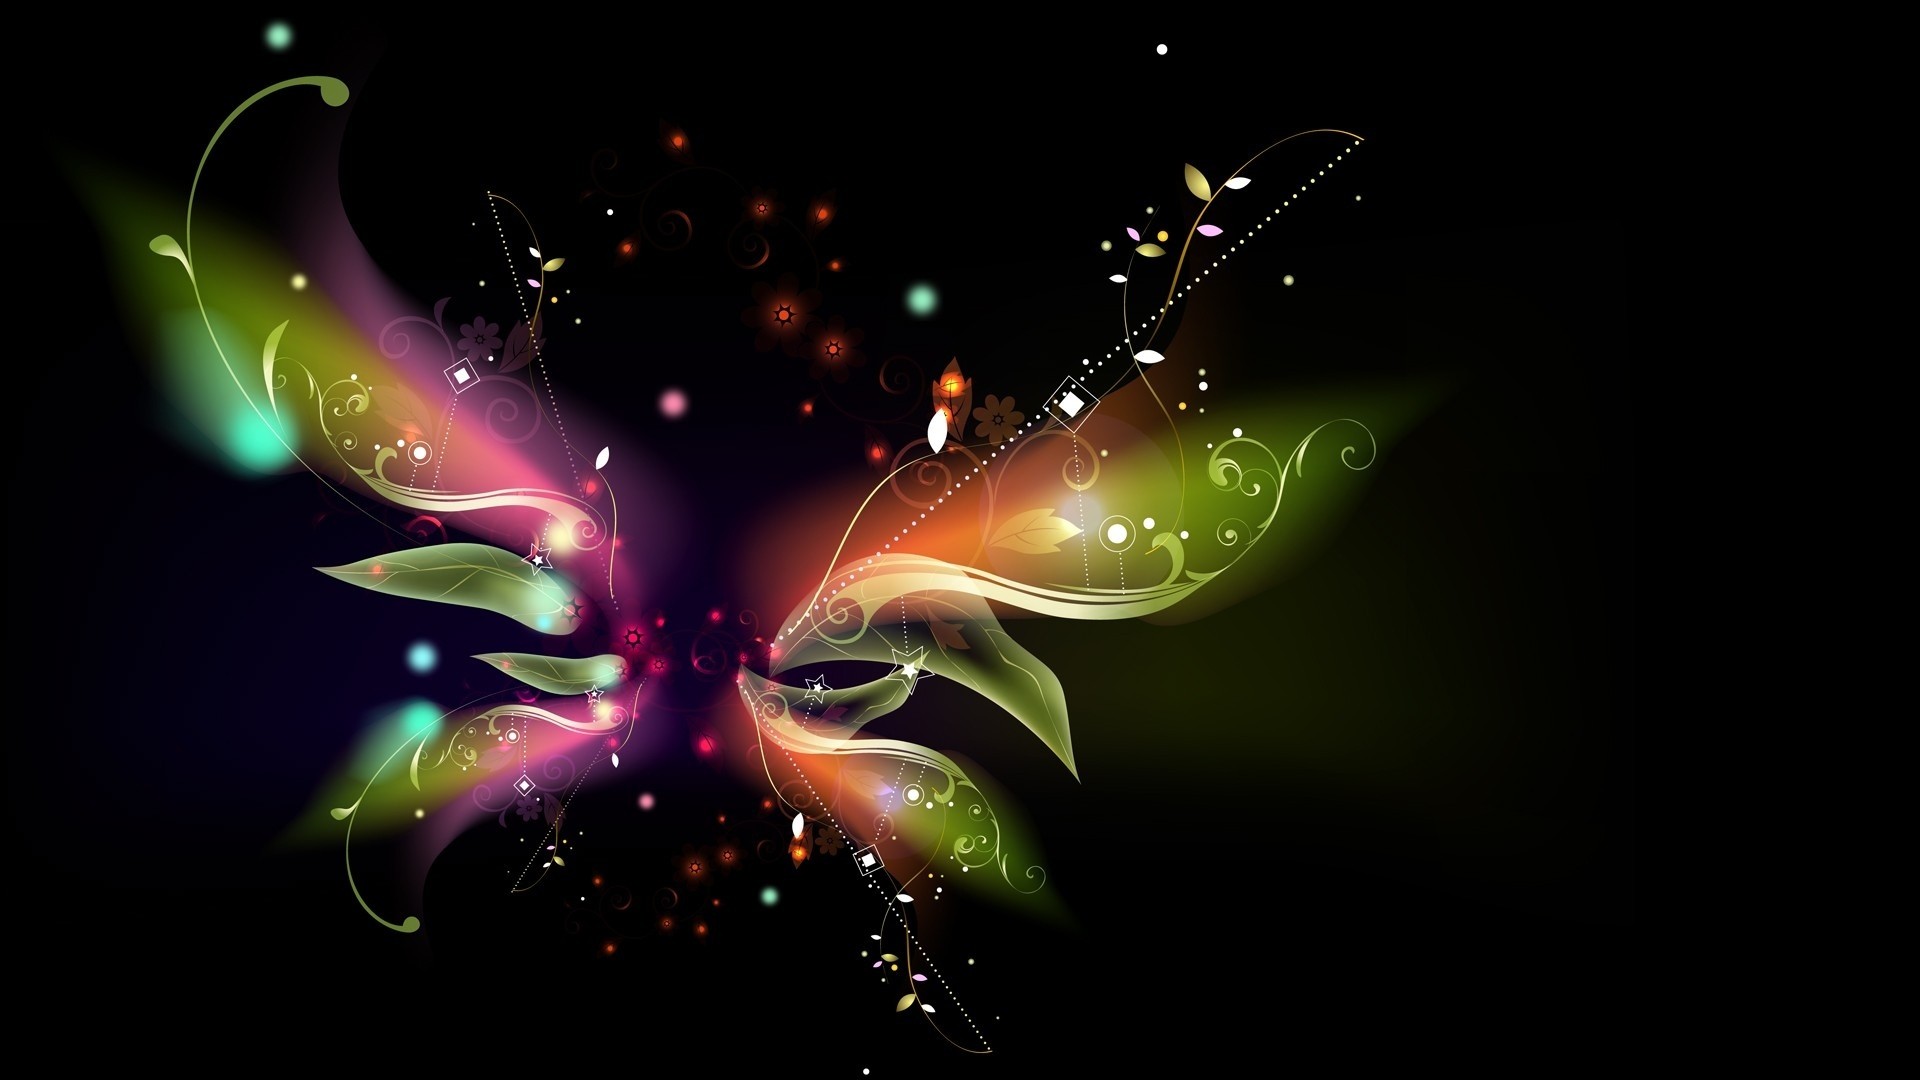 1920x1080 vector, free vectors, artworks, wings,free images,abstract background,  butterfly, artwork, black, widescreen Wallpaper HD